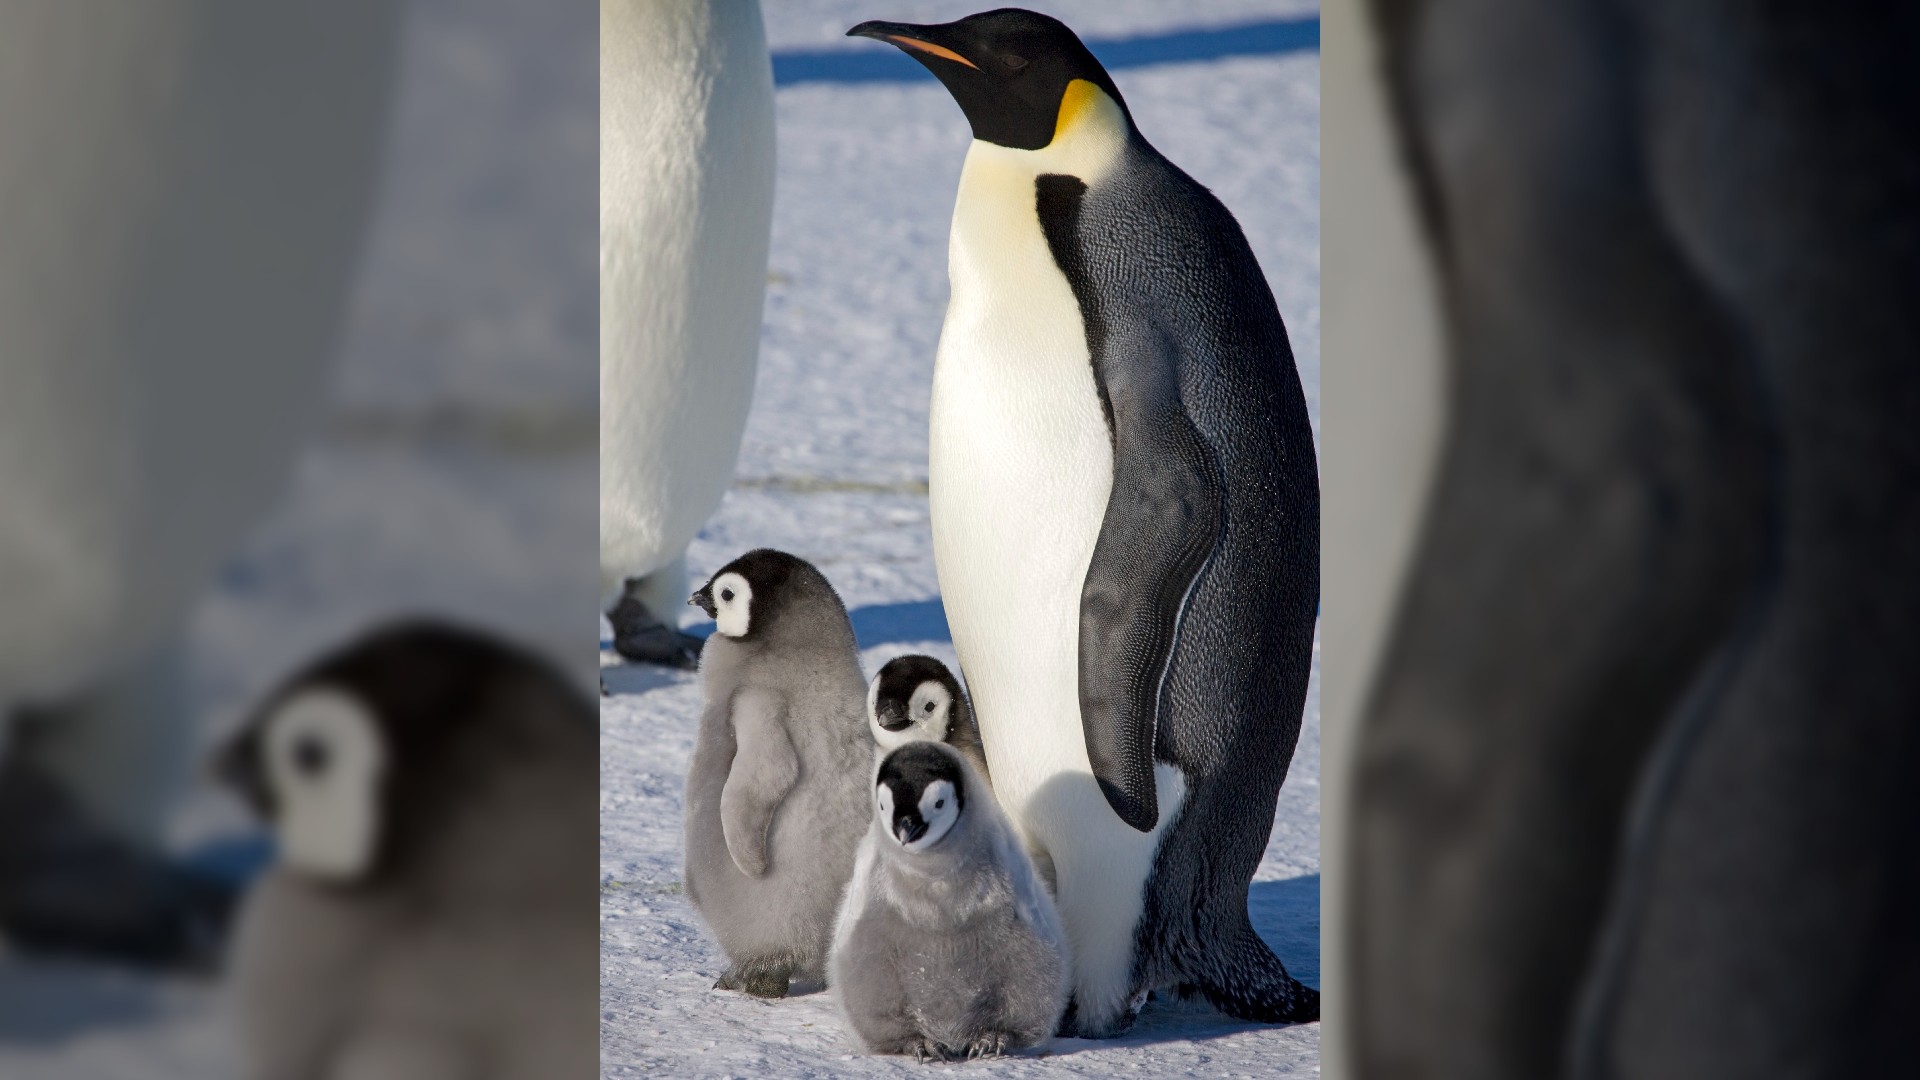 Emperor penguins are the largest of all penguins, growing up to 100 cm.  They get their name from their dramatic black, white, and yellow plumage.  Here we see an adult penguin standing with 3 fluffy gray baby penguins.